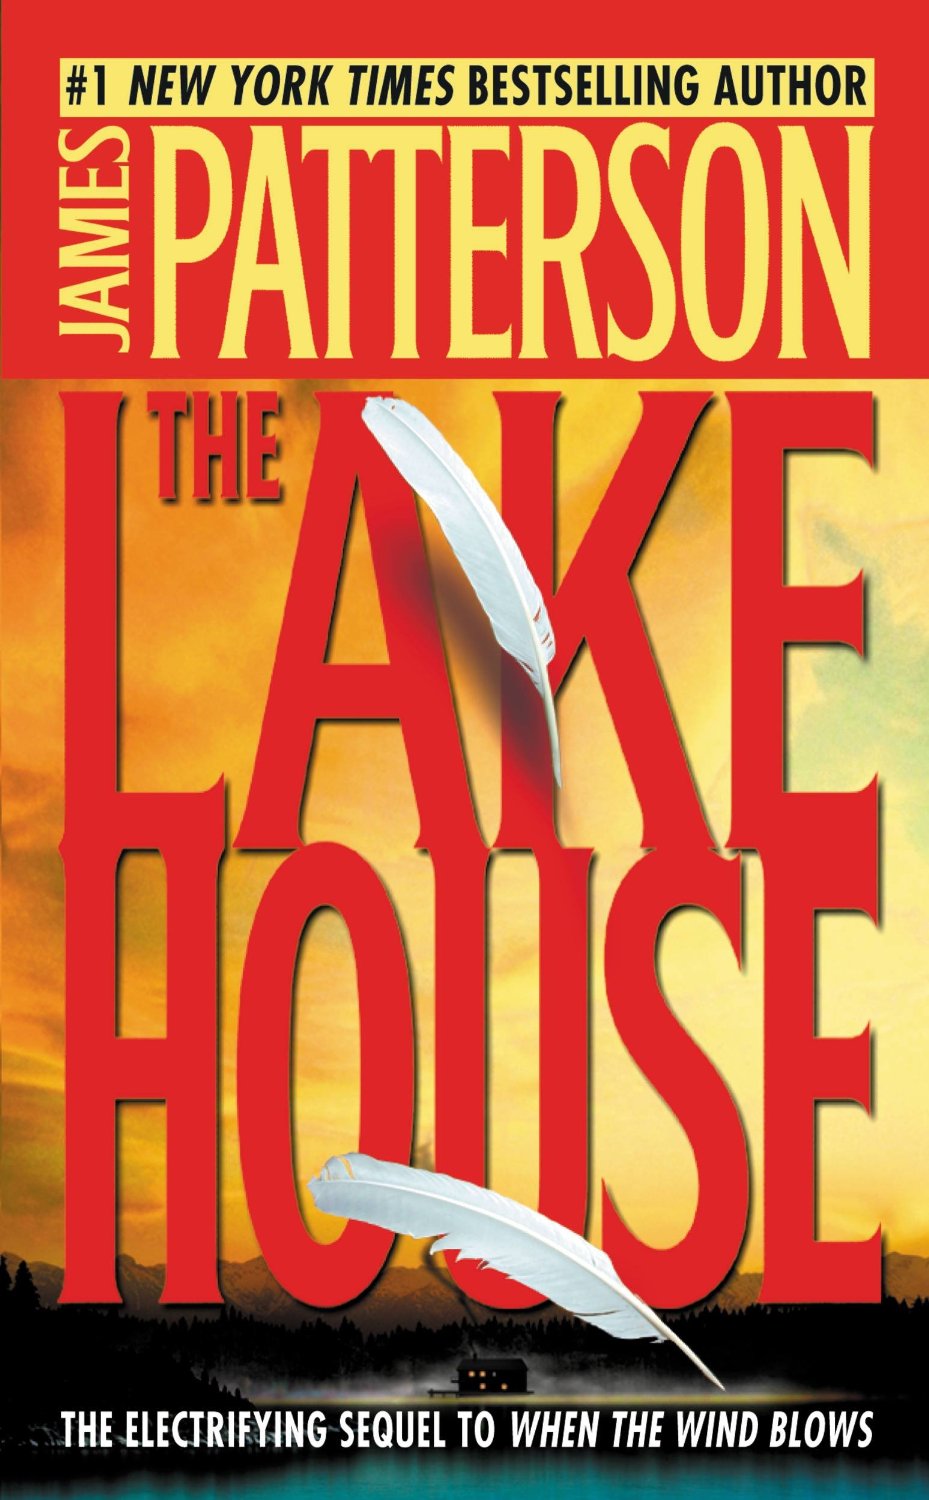 James Patterson Book List by Year - ThoughtCo